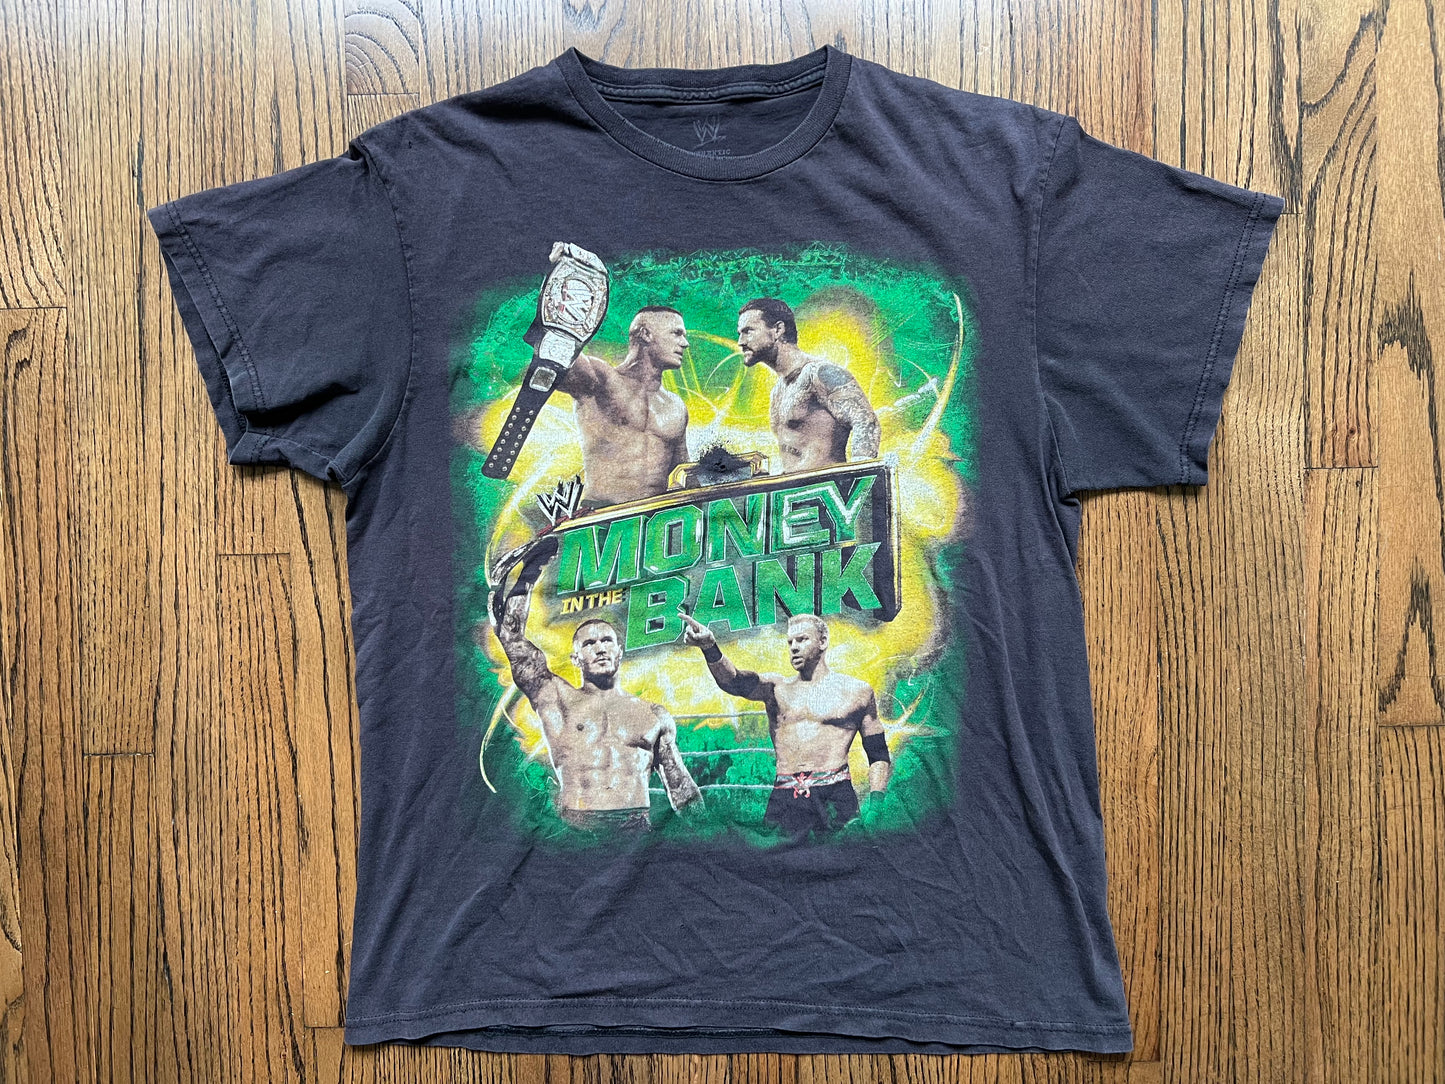 2011 WWE Money In The Bank two sided event shirt featuring Randy Orton, CM Punk, John Cena, Christian and many others on the back (flaws)